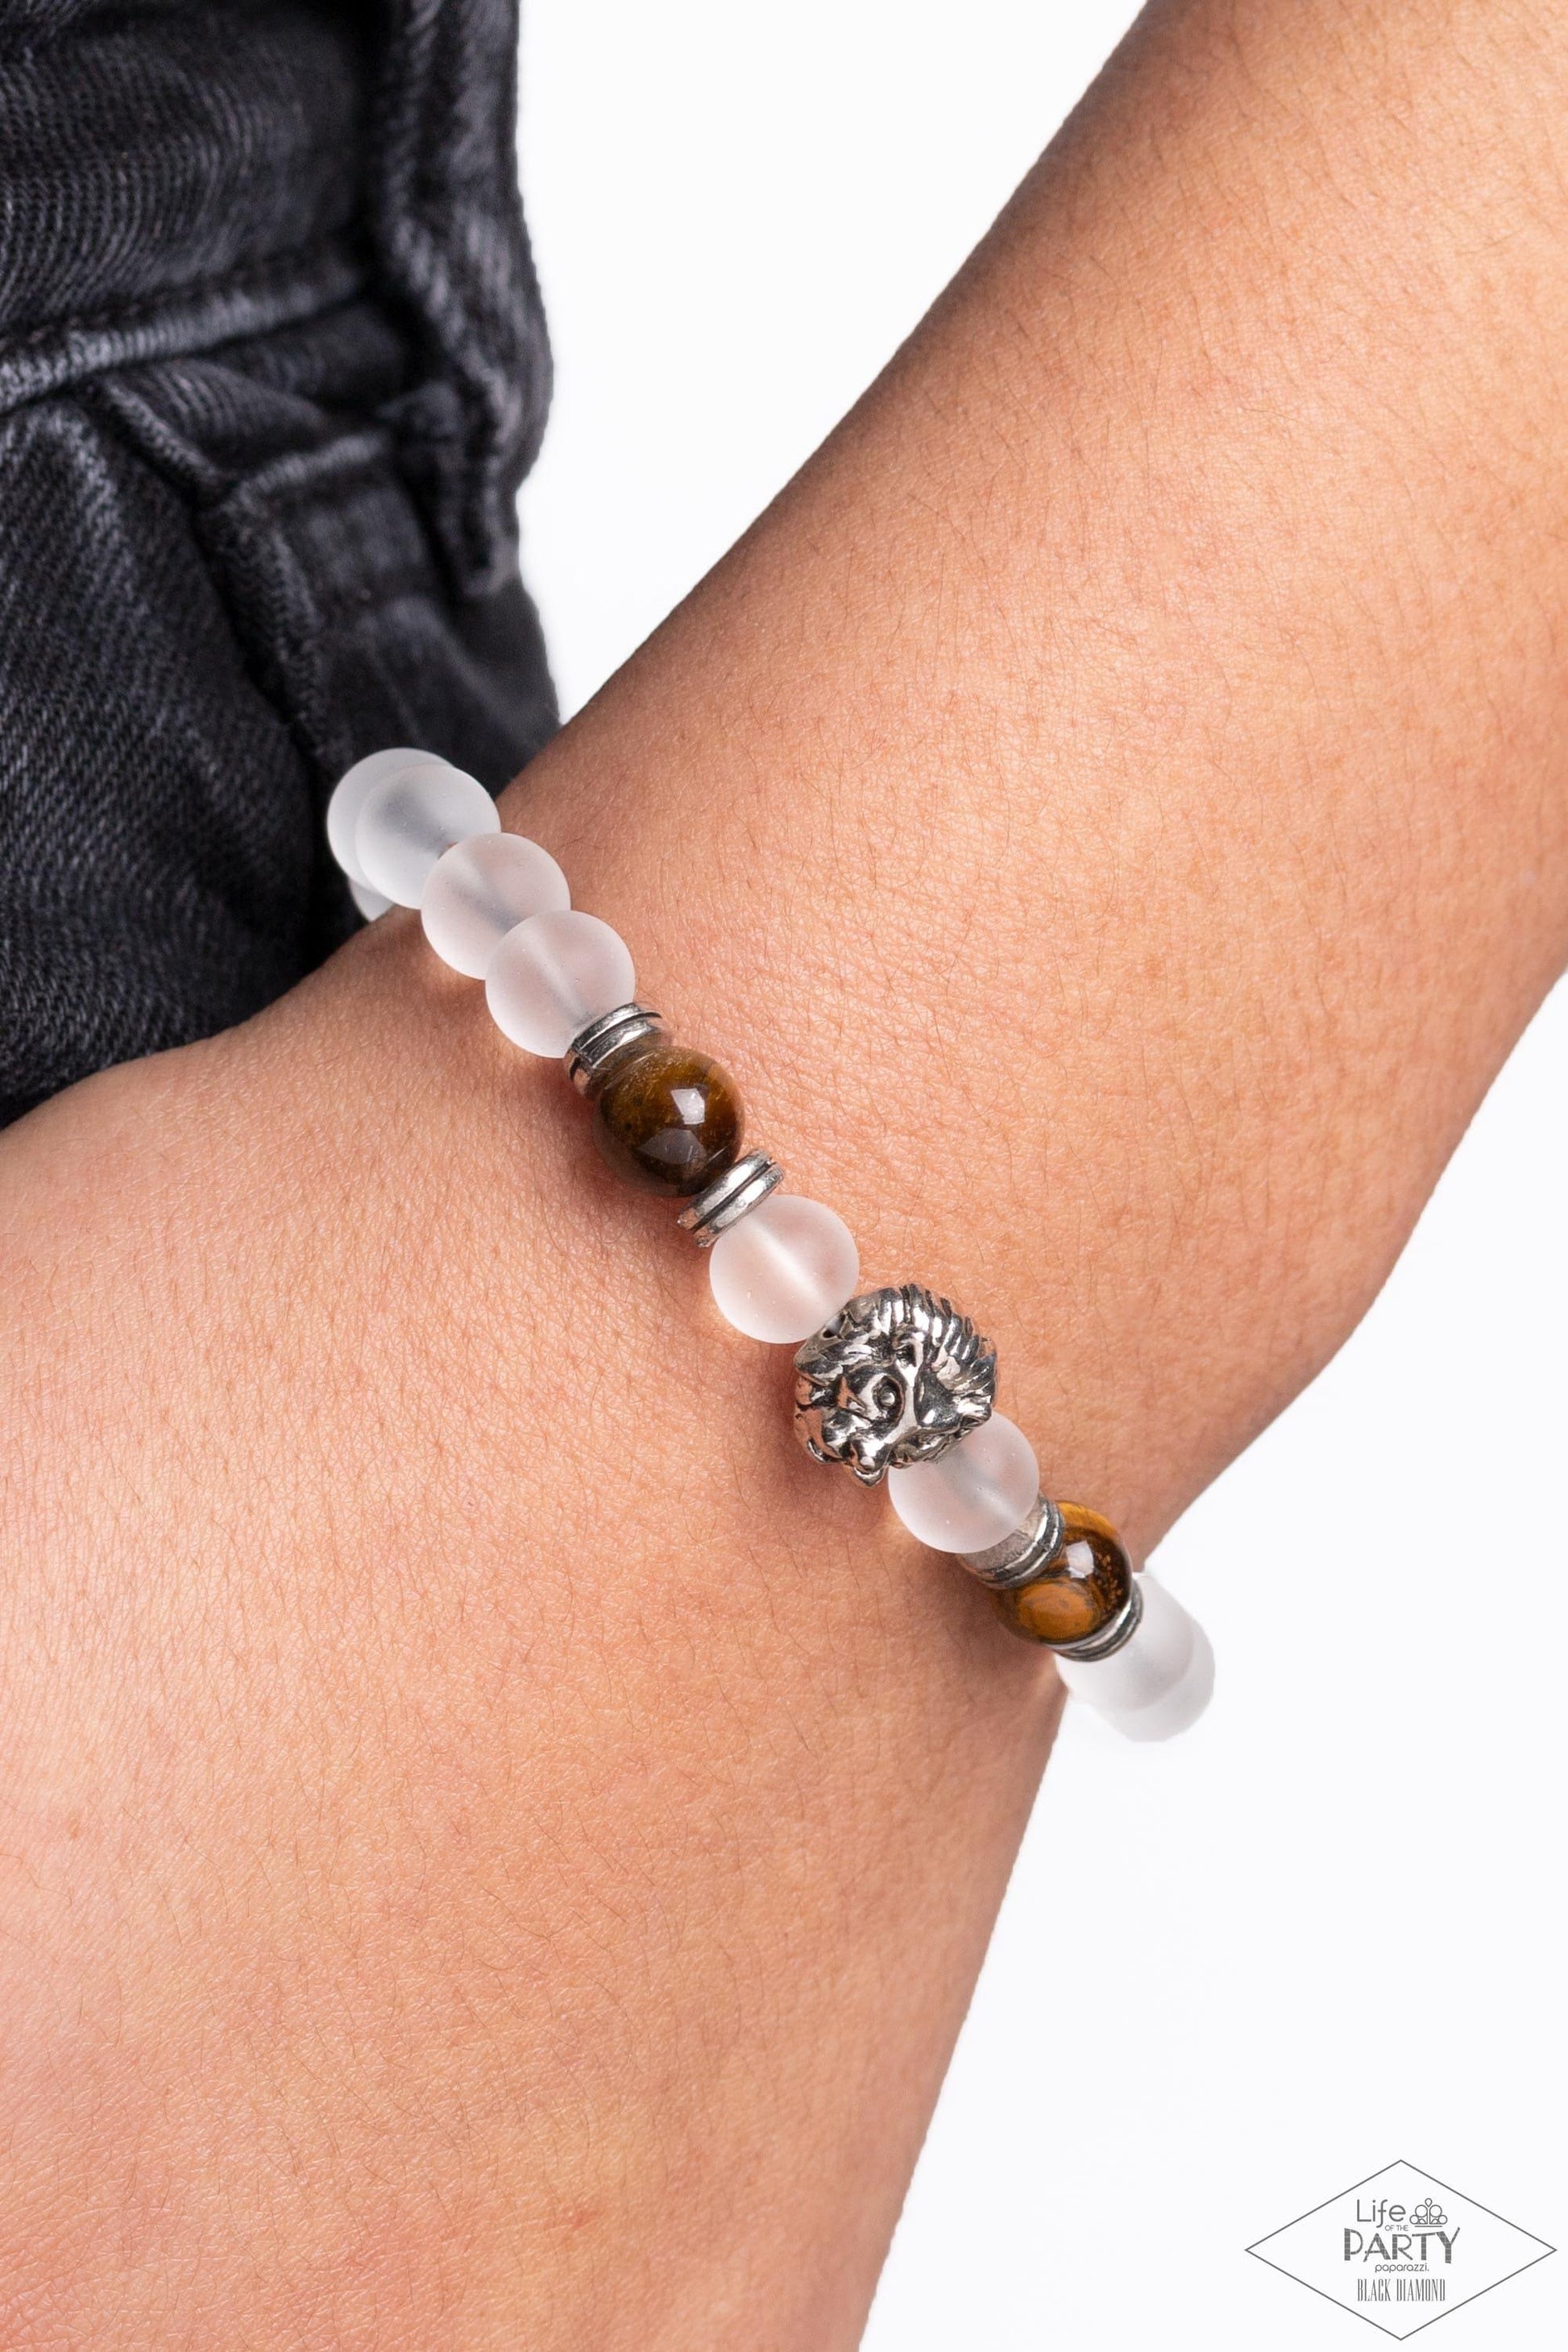 Paparazzi Accessories - The Lions Share - Brown Urban Bracelet - Bling by JessieK